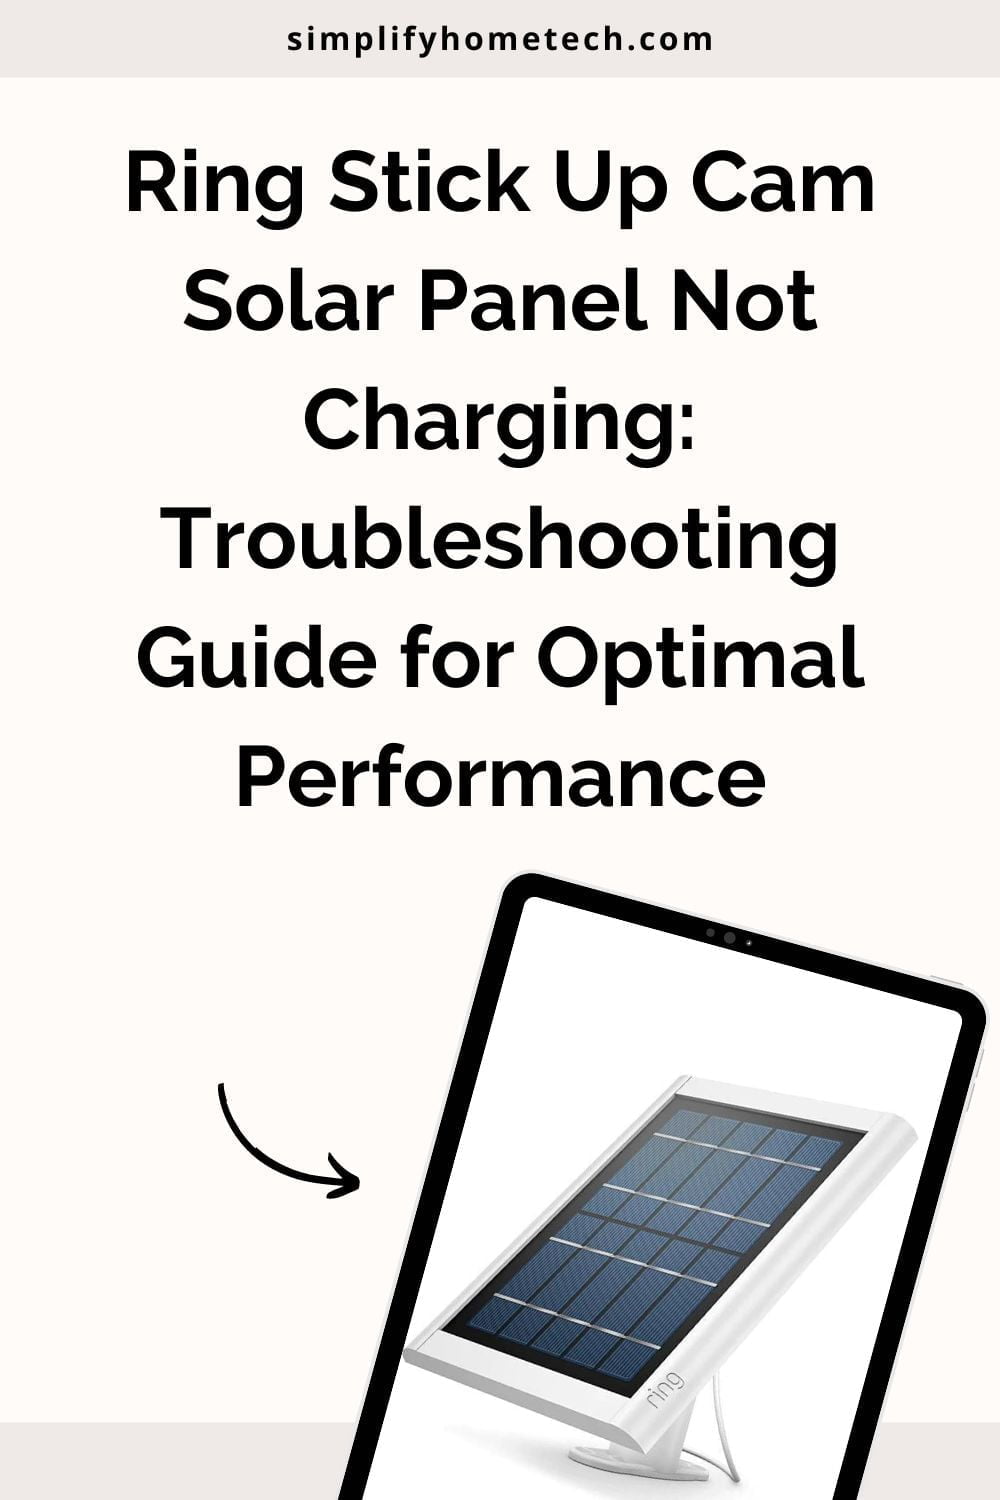 Ring Stick Up Cam Solar Panel Not Charging